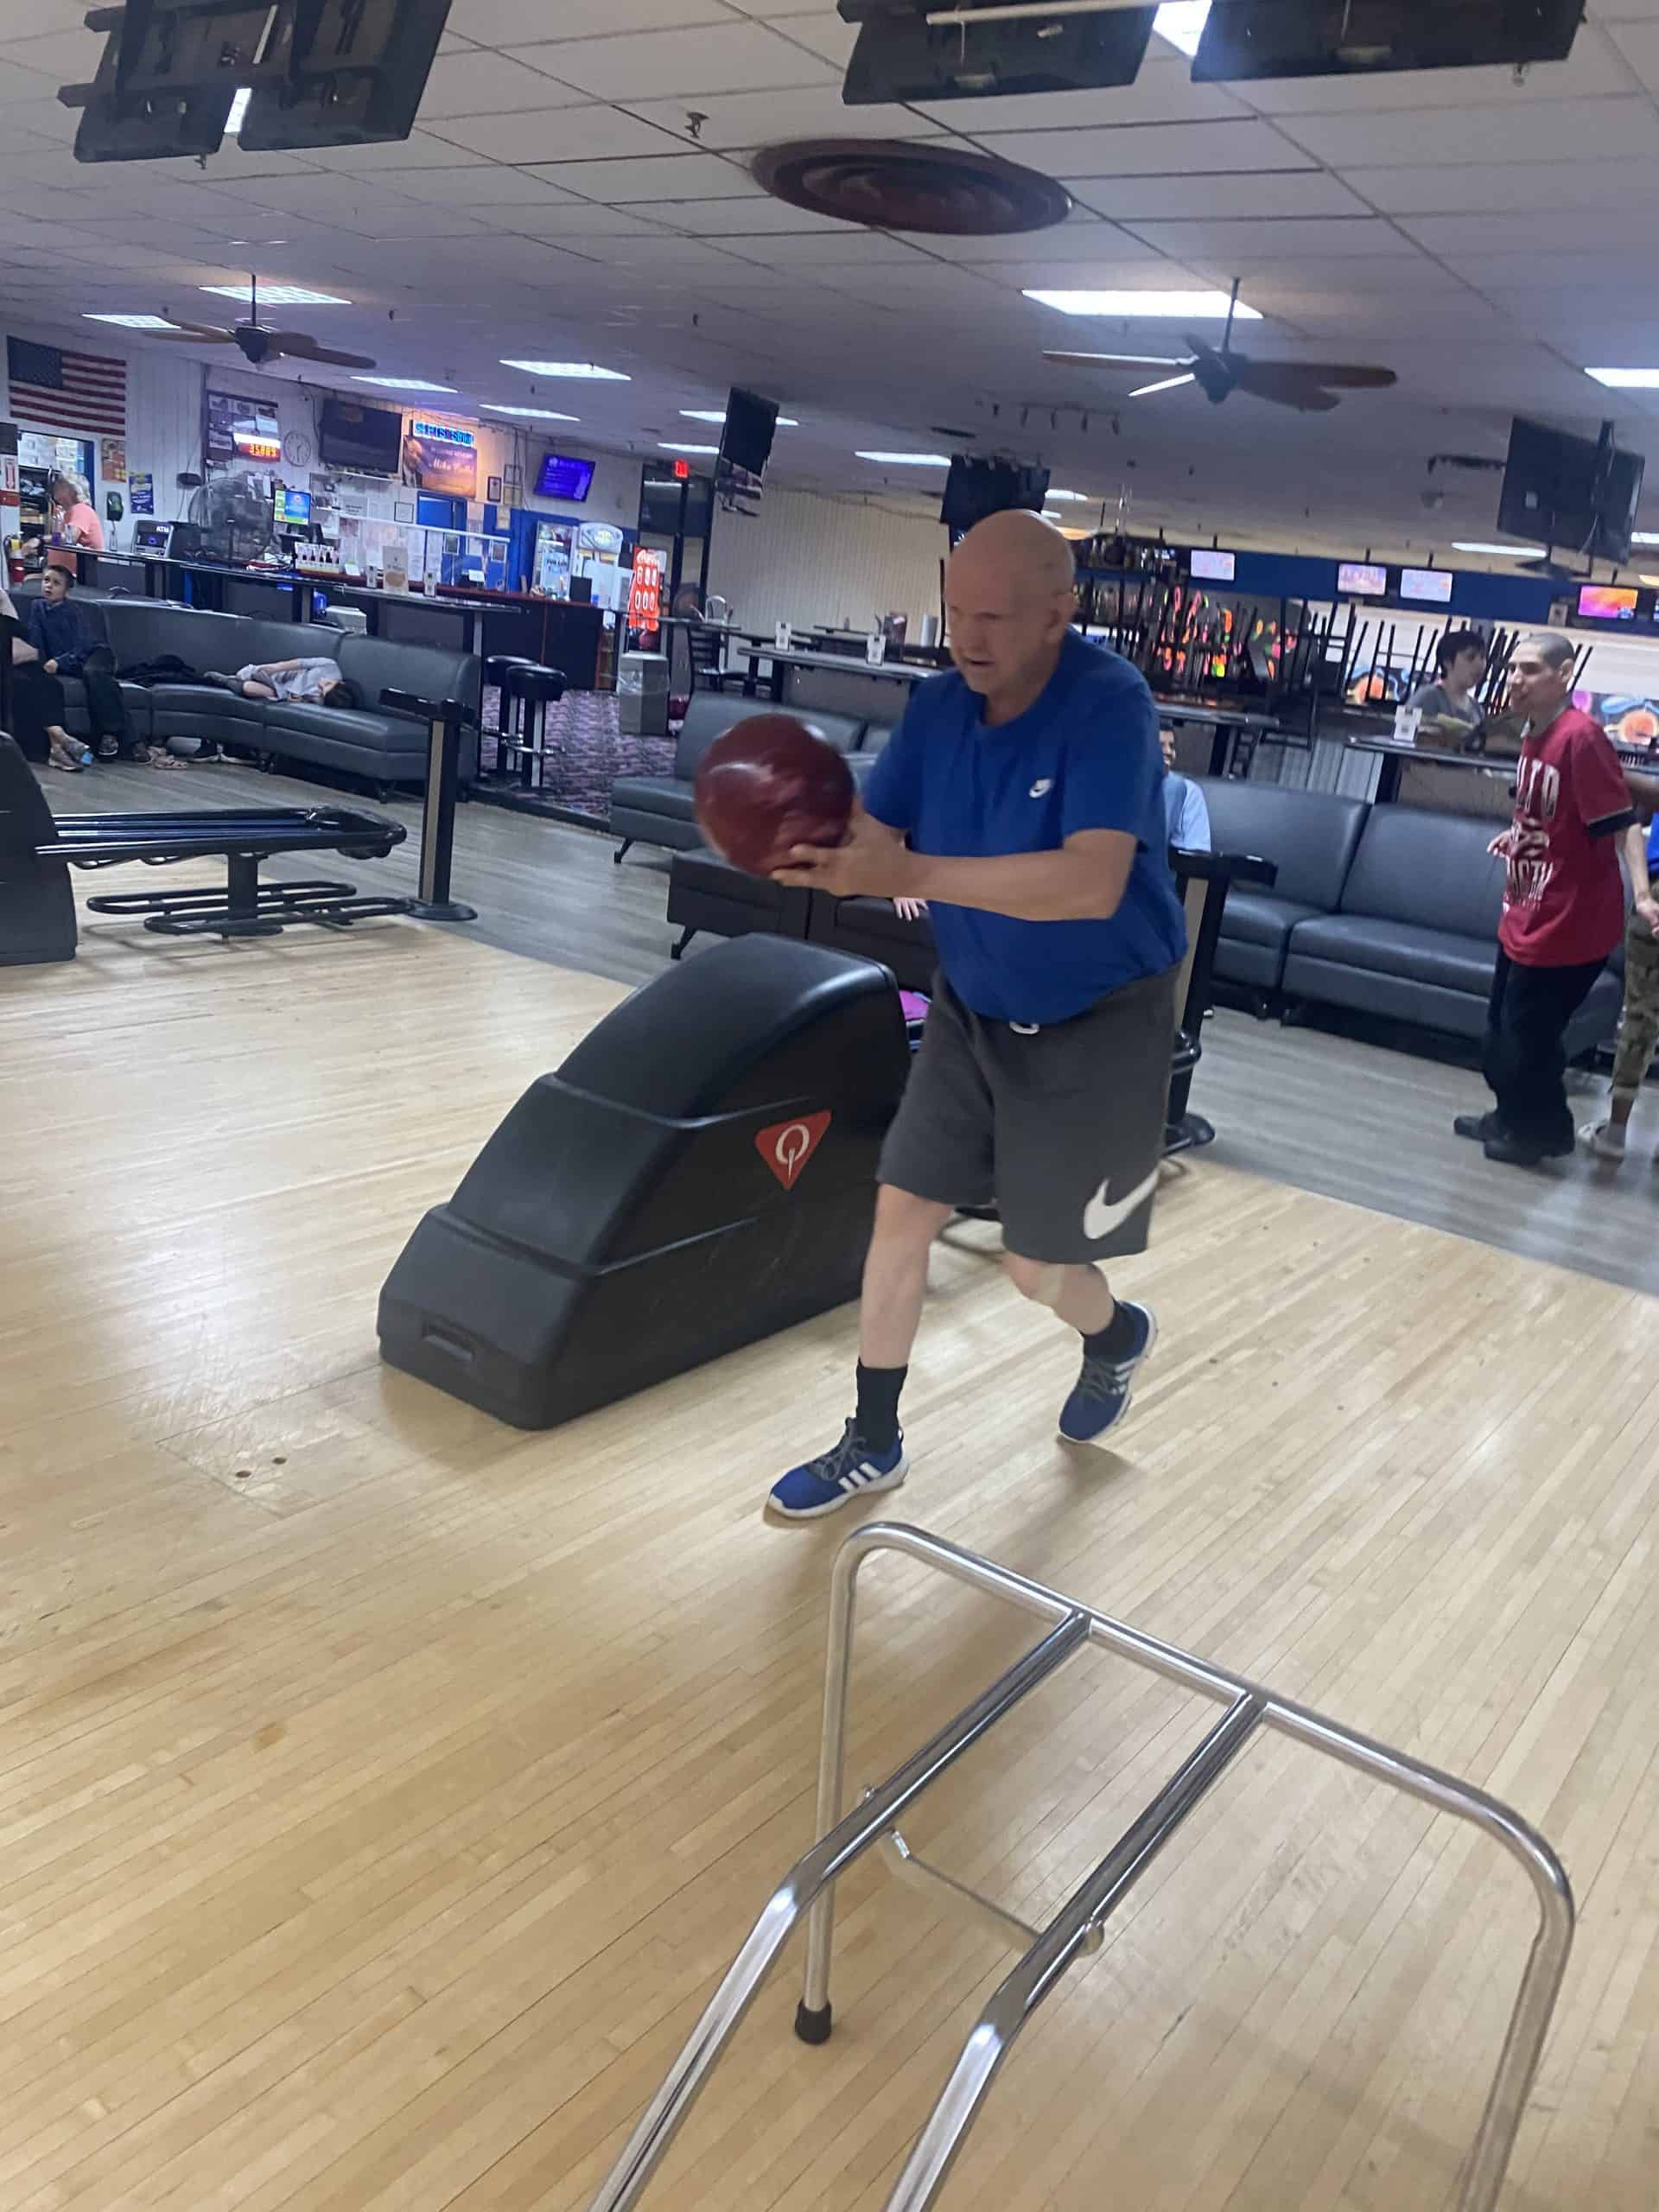 Man getting ready to throw a bowling ball.